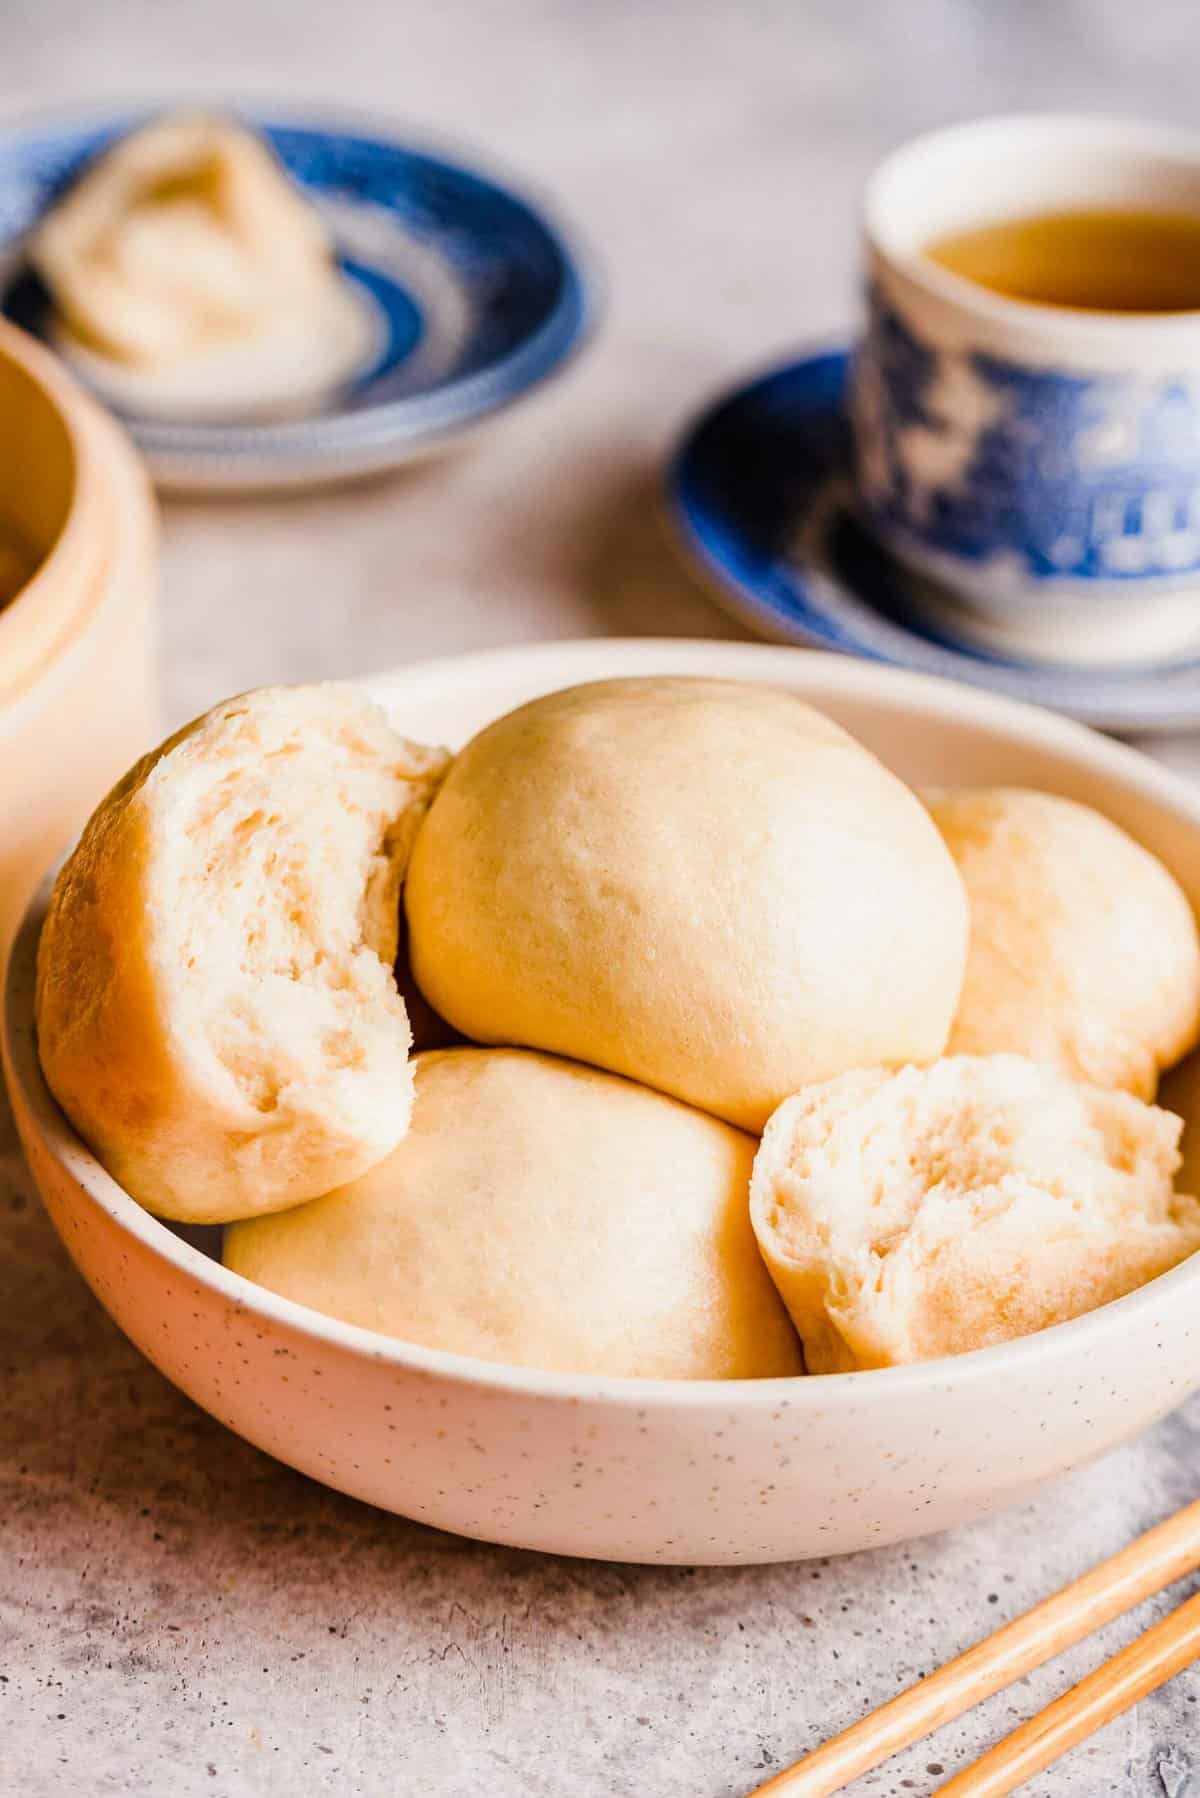 A bowl full of Chinese steamed buns, including one that's torn in half, with a cup of tea in the background